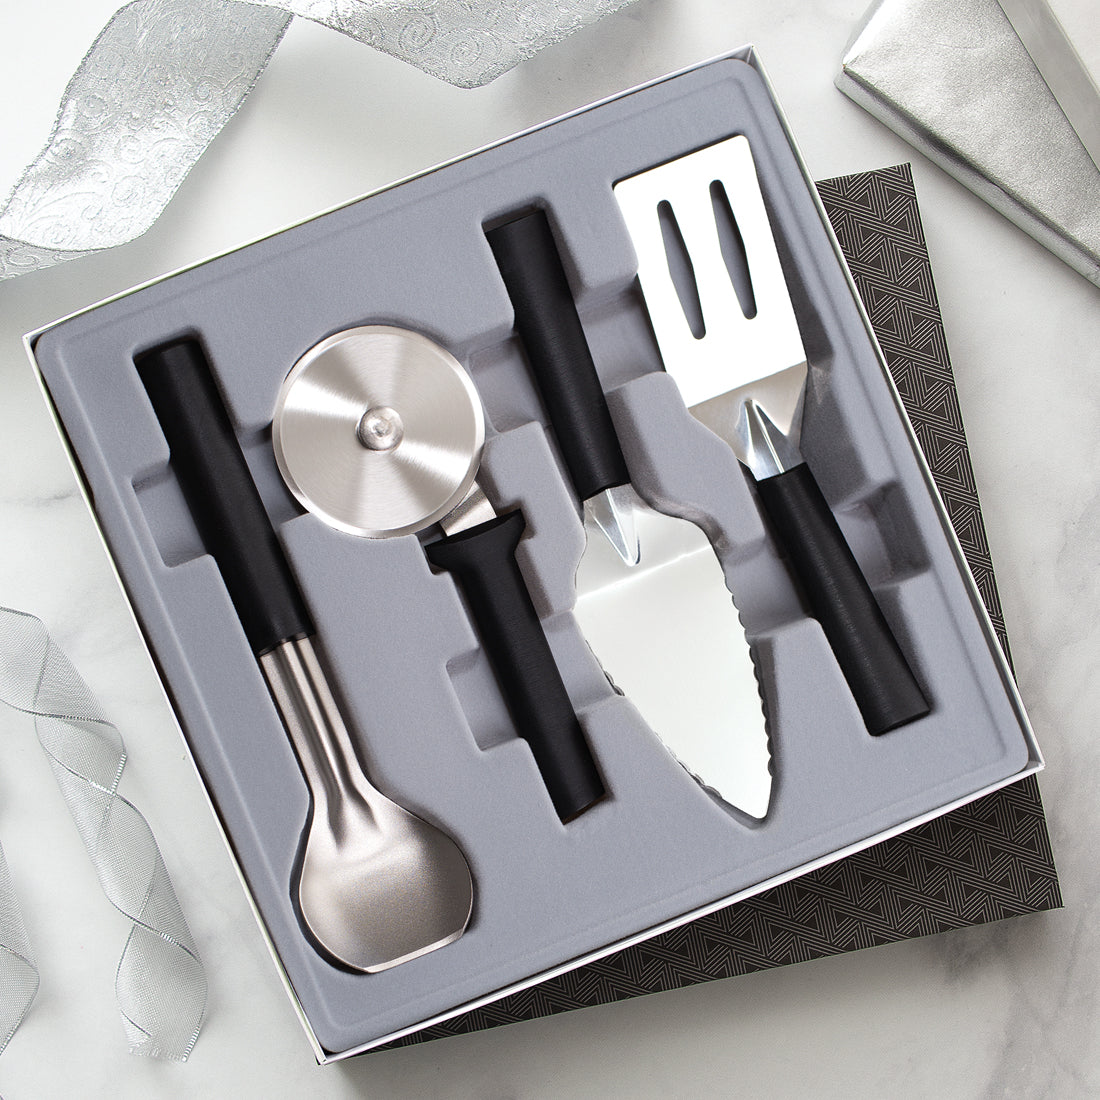 Silver handled Ultimate Utensil Gift Set on a white background with white and silver table decorations